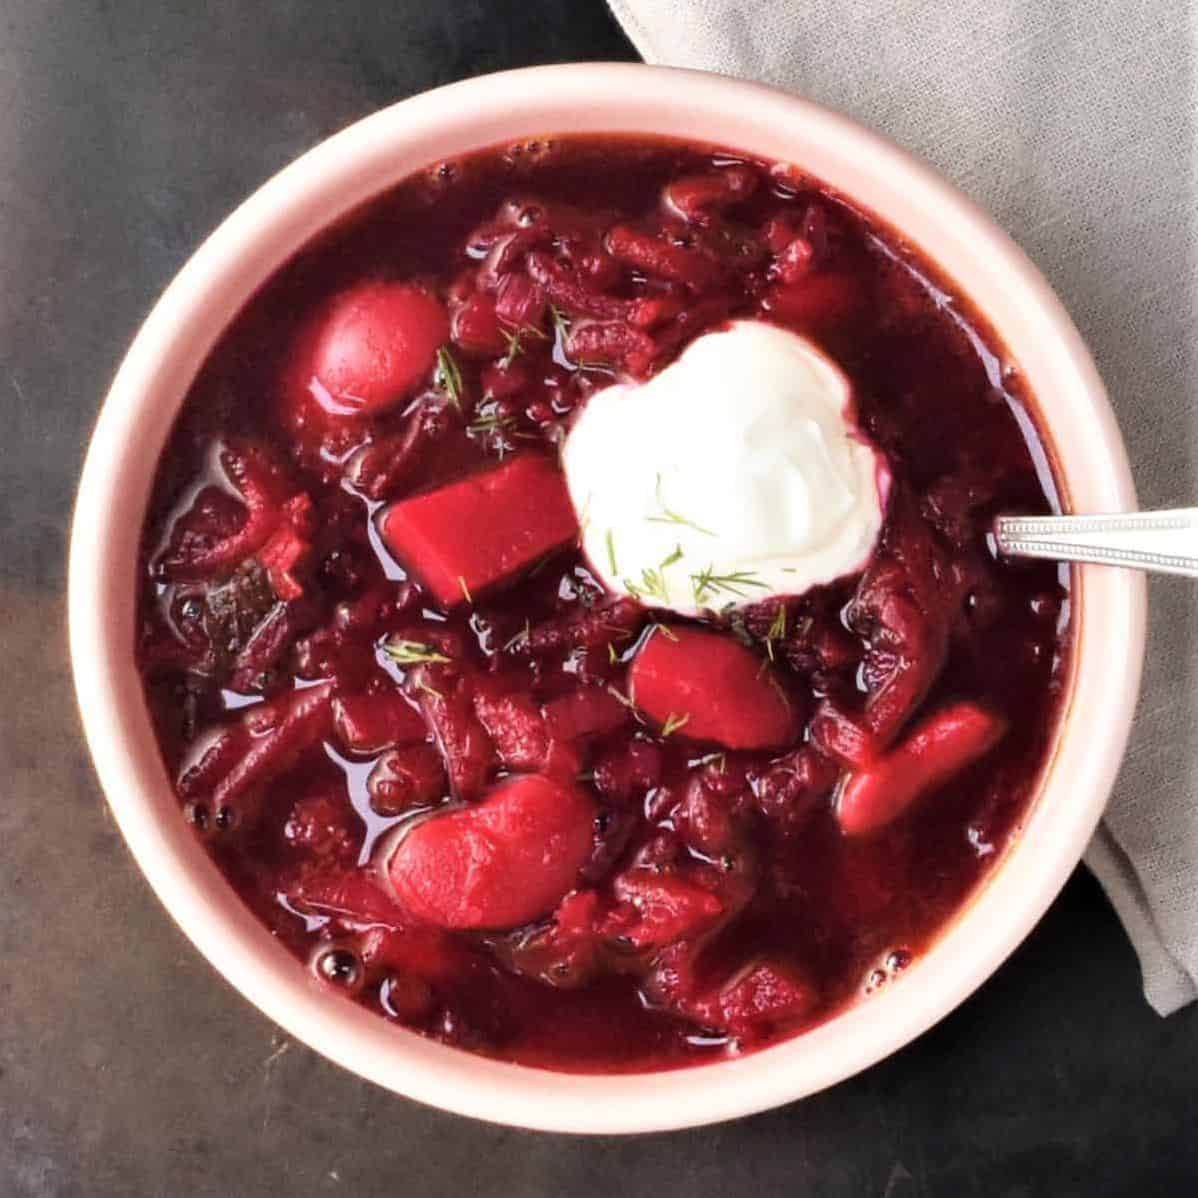  Don't let the long list of ingredients intimidate you, this borscht is worth it.